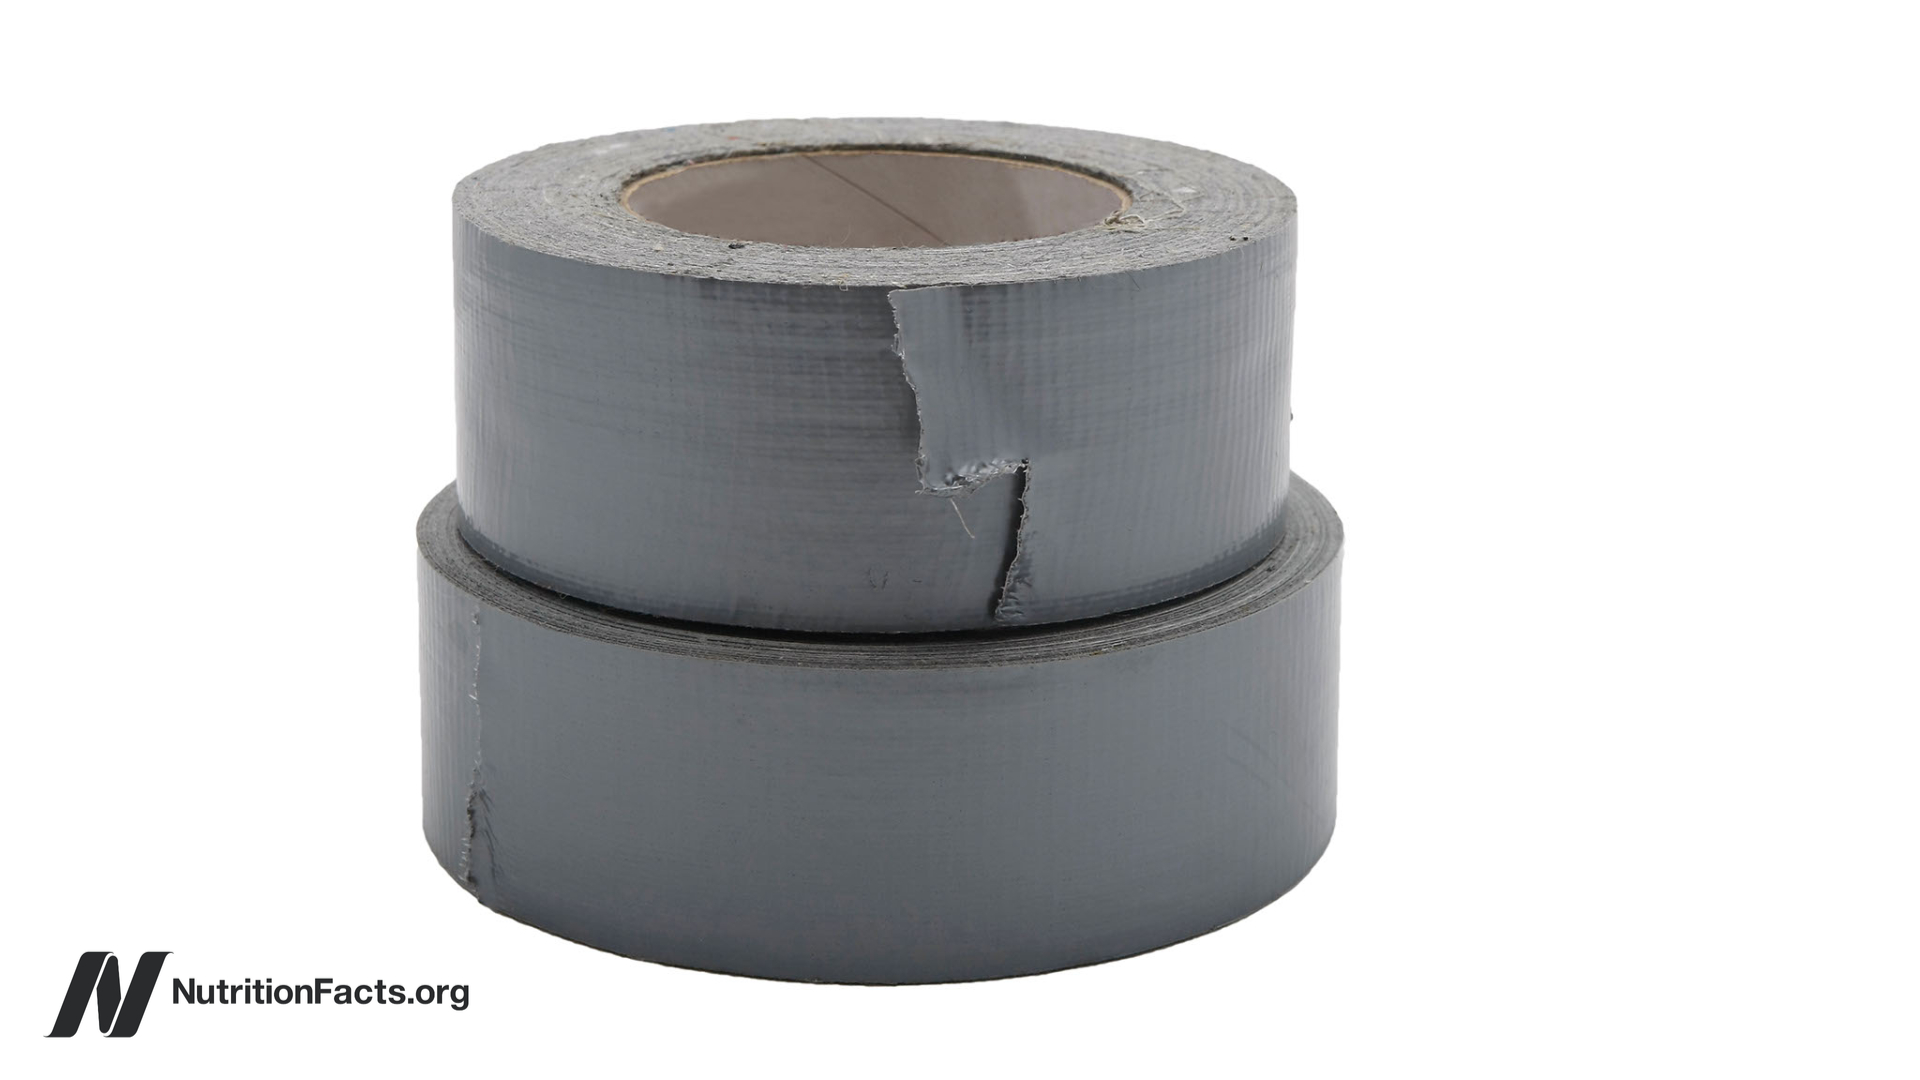 Stick with It--Put Your Duct Tape to the Test!